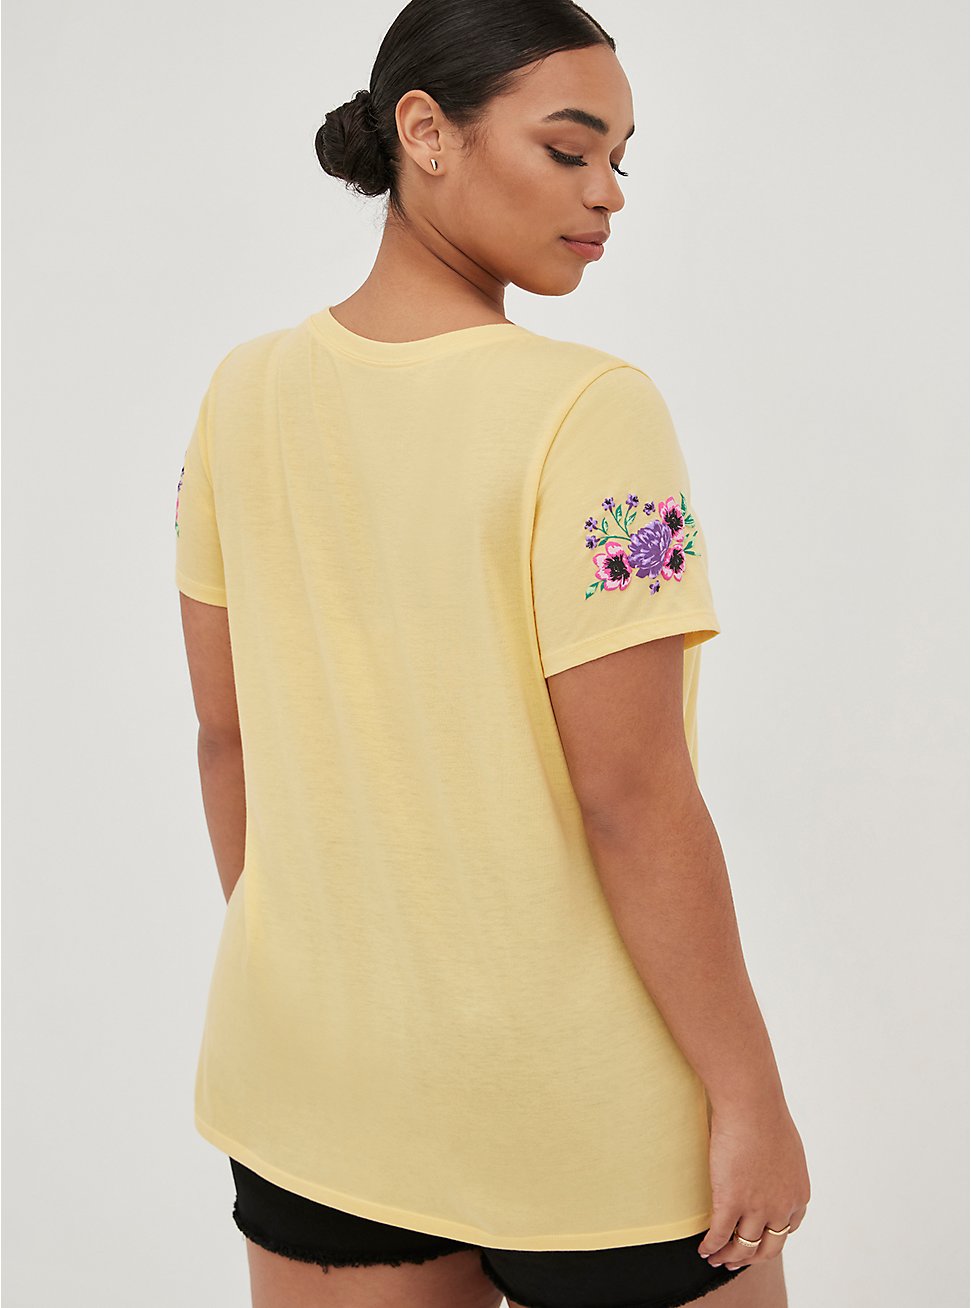 Plus Size Everyday Tee - Signature Jersey Floral Puff Graphic Yellow, YELLOW, hi-res